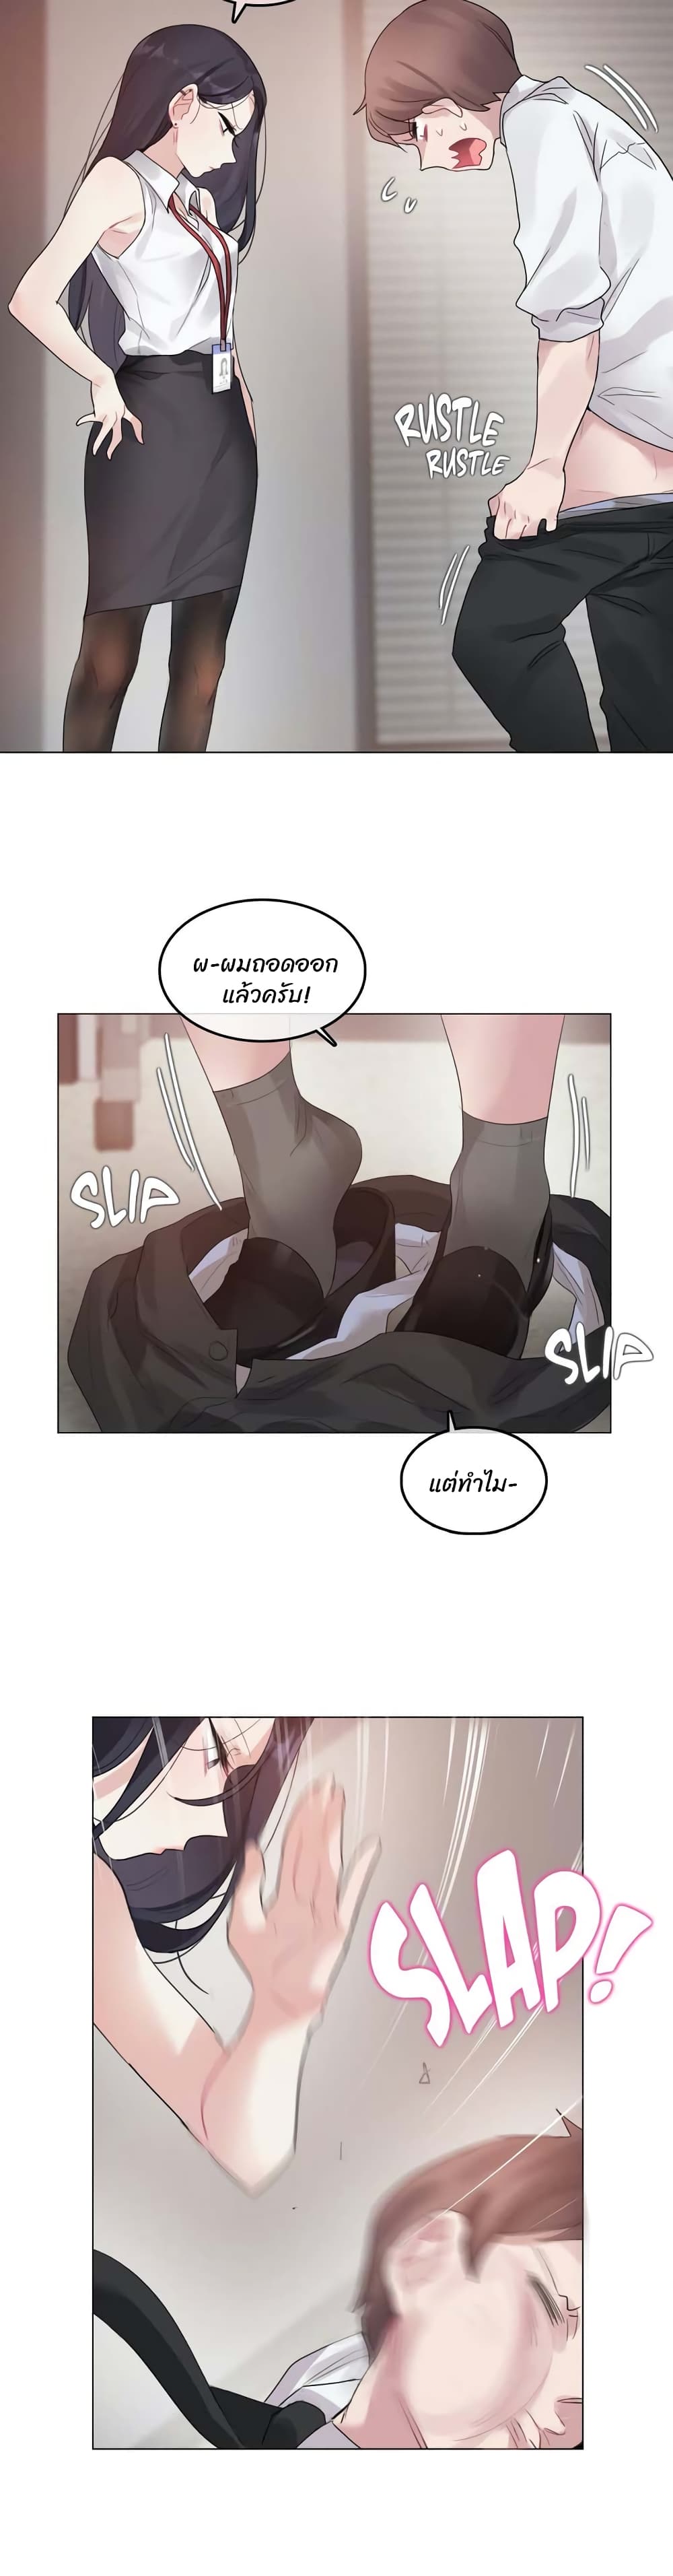 A Pervert's Daily Life 96 (18)